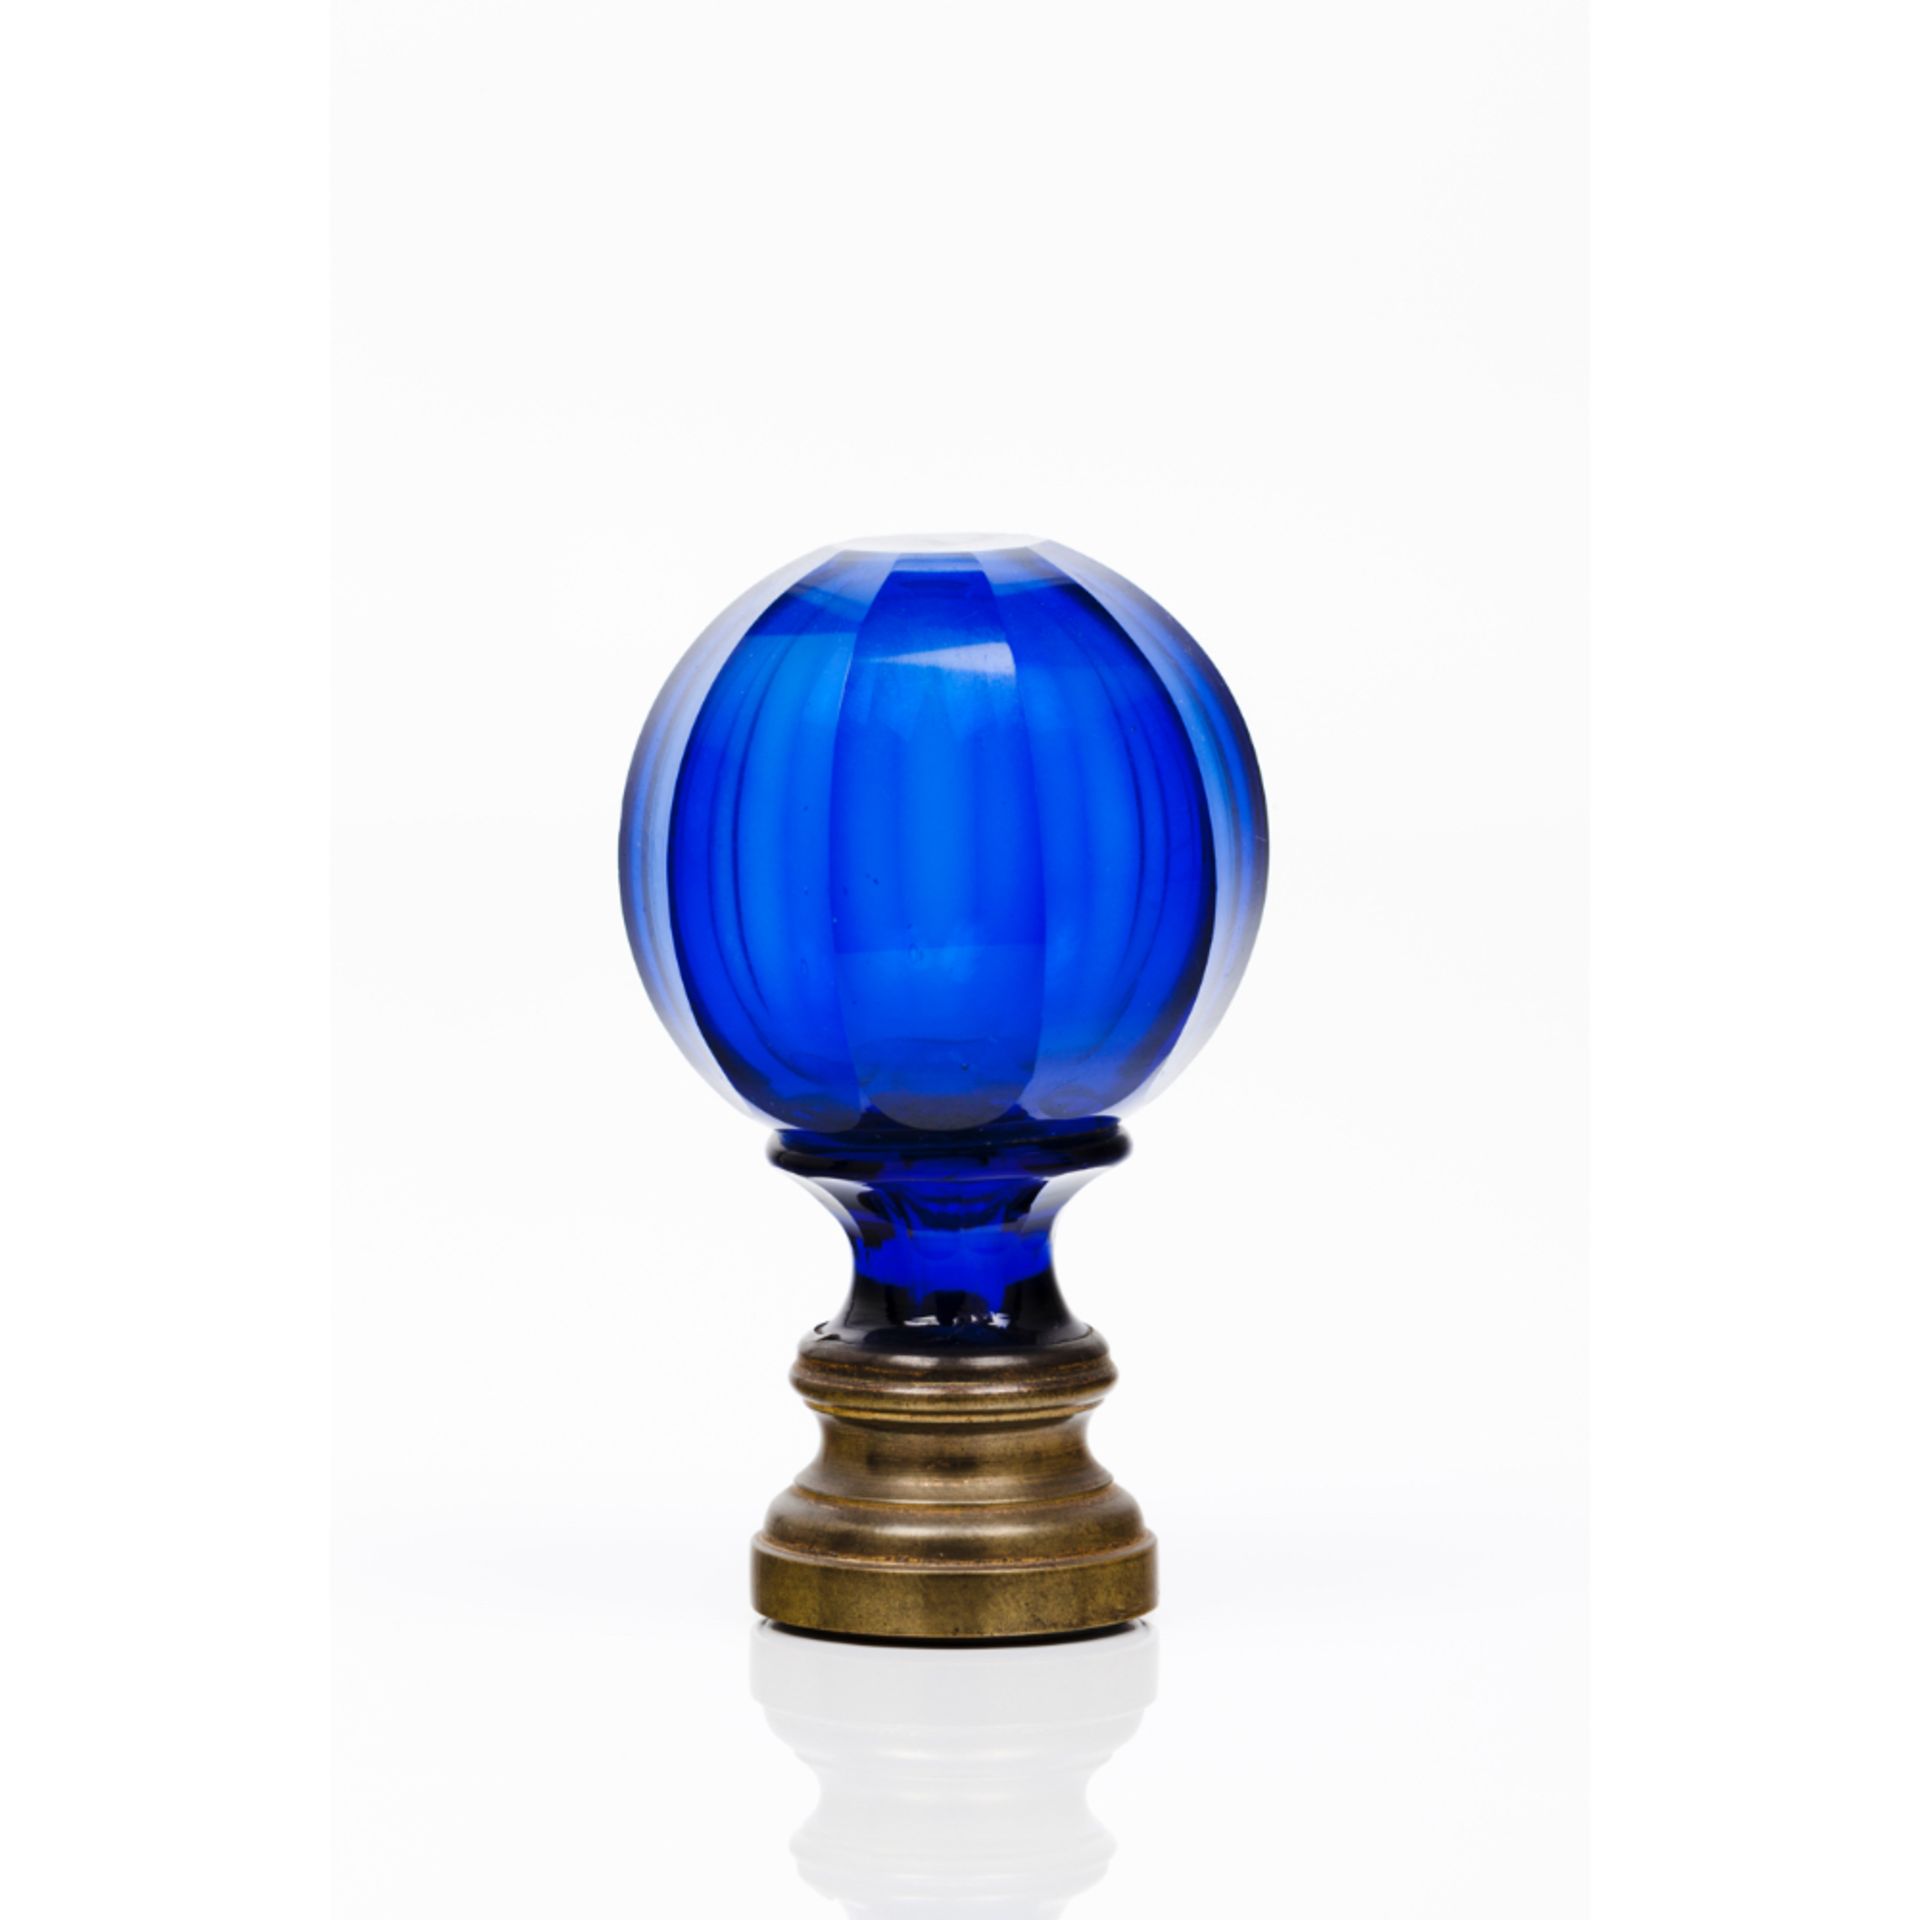 A staircase finialBlue cut glass Metal fitting Possibly Baccarat or Saint Louis France, 19th century